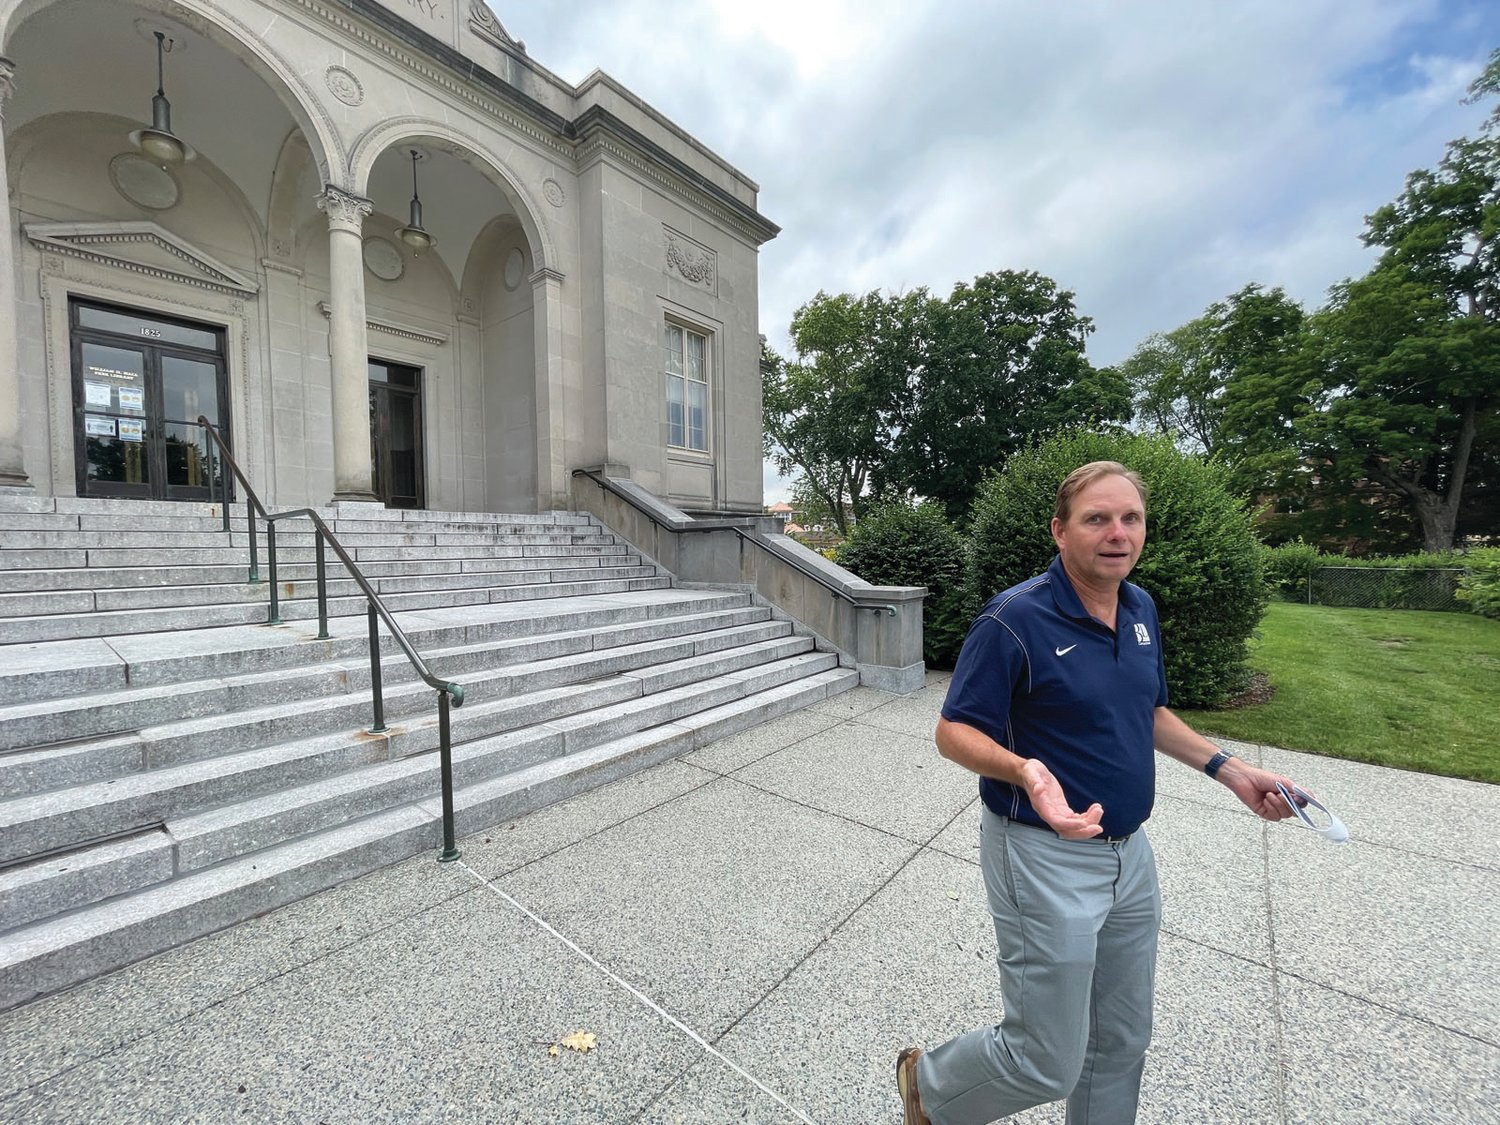 MAJOR PROJECT: Michael Moonan, a landscape architect who serves as a William Hall trustee and chair of its library committee, discusses the exterior improvements to the facility and surrounding property.